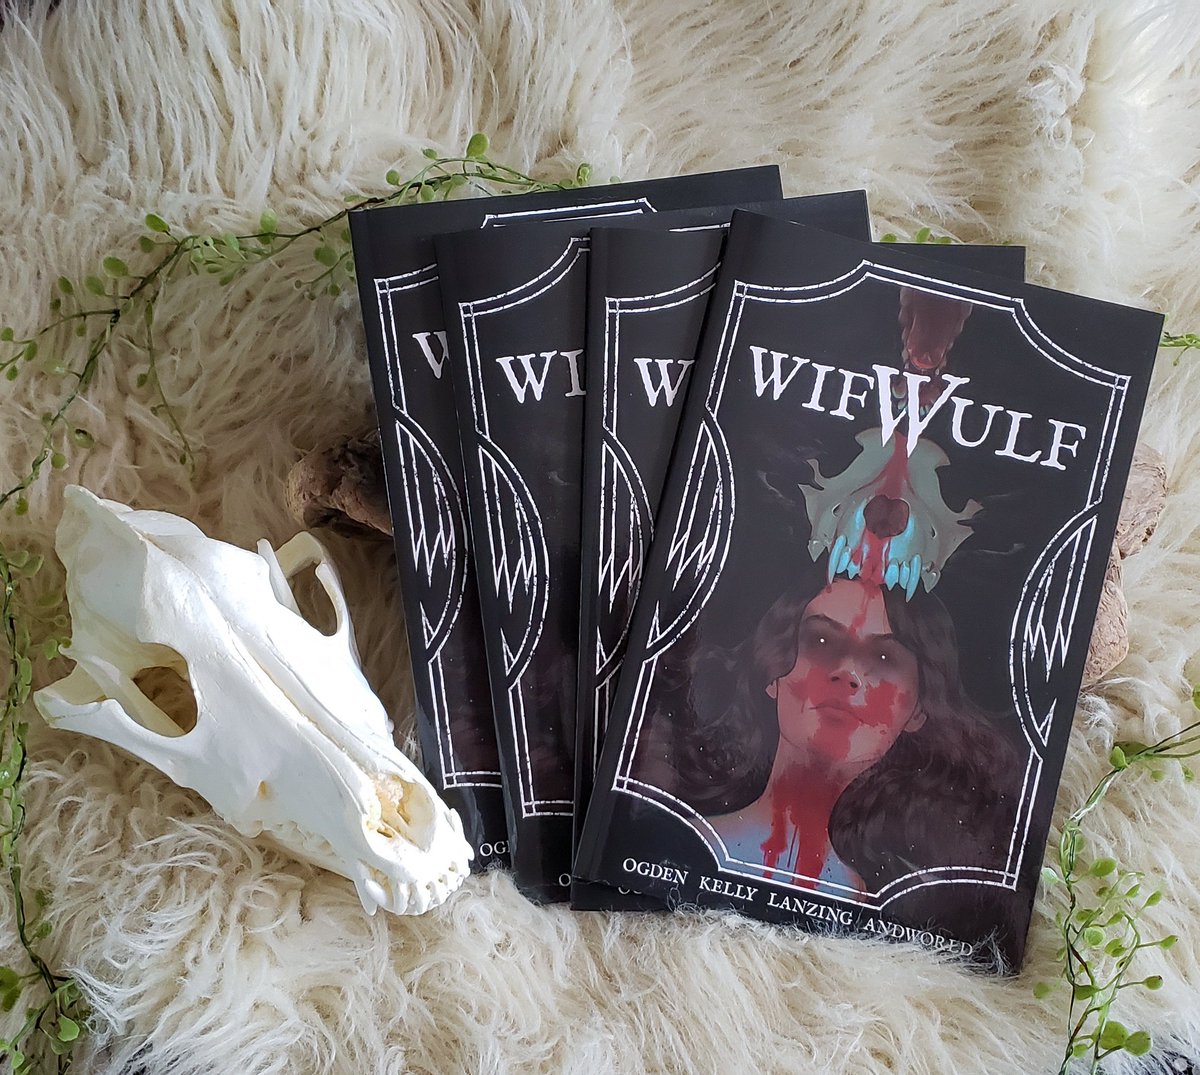 Happy NCBD! WIFWULF is officially out now. Go find it in the wild, if you can! 👀🐺